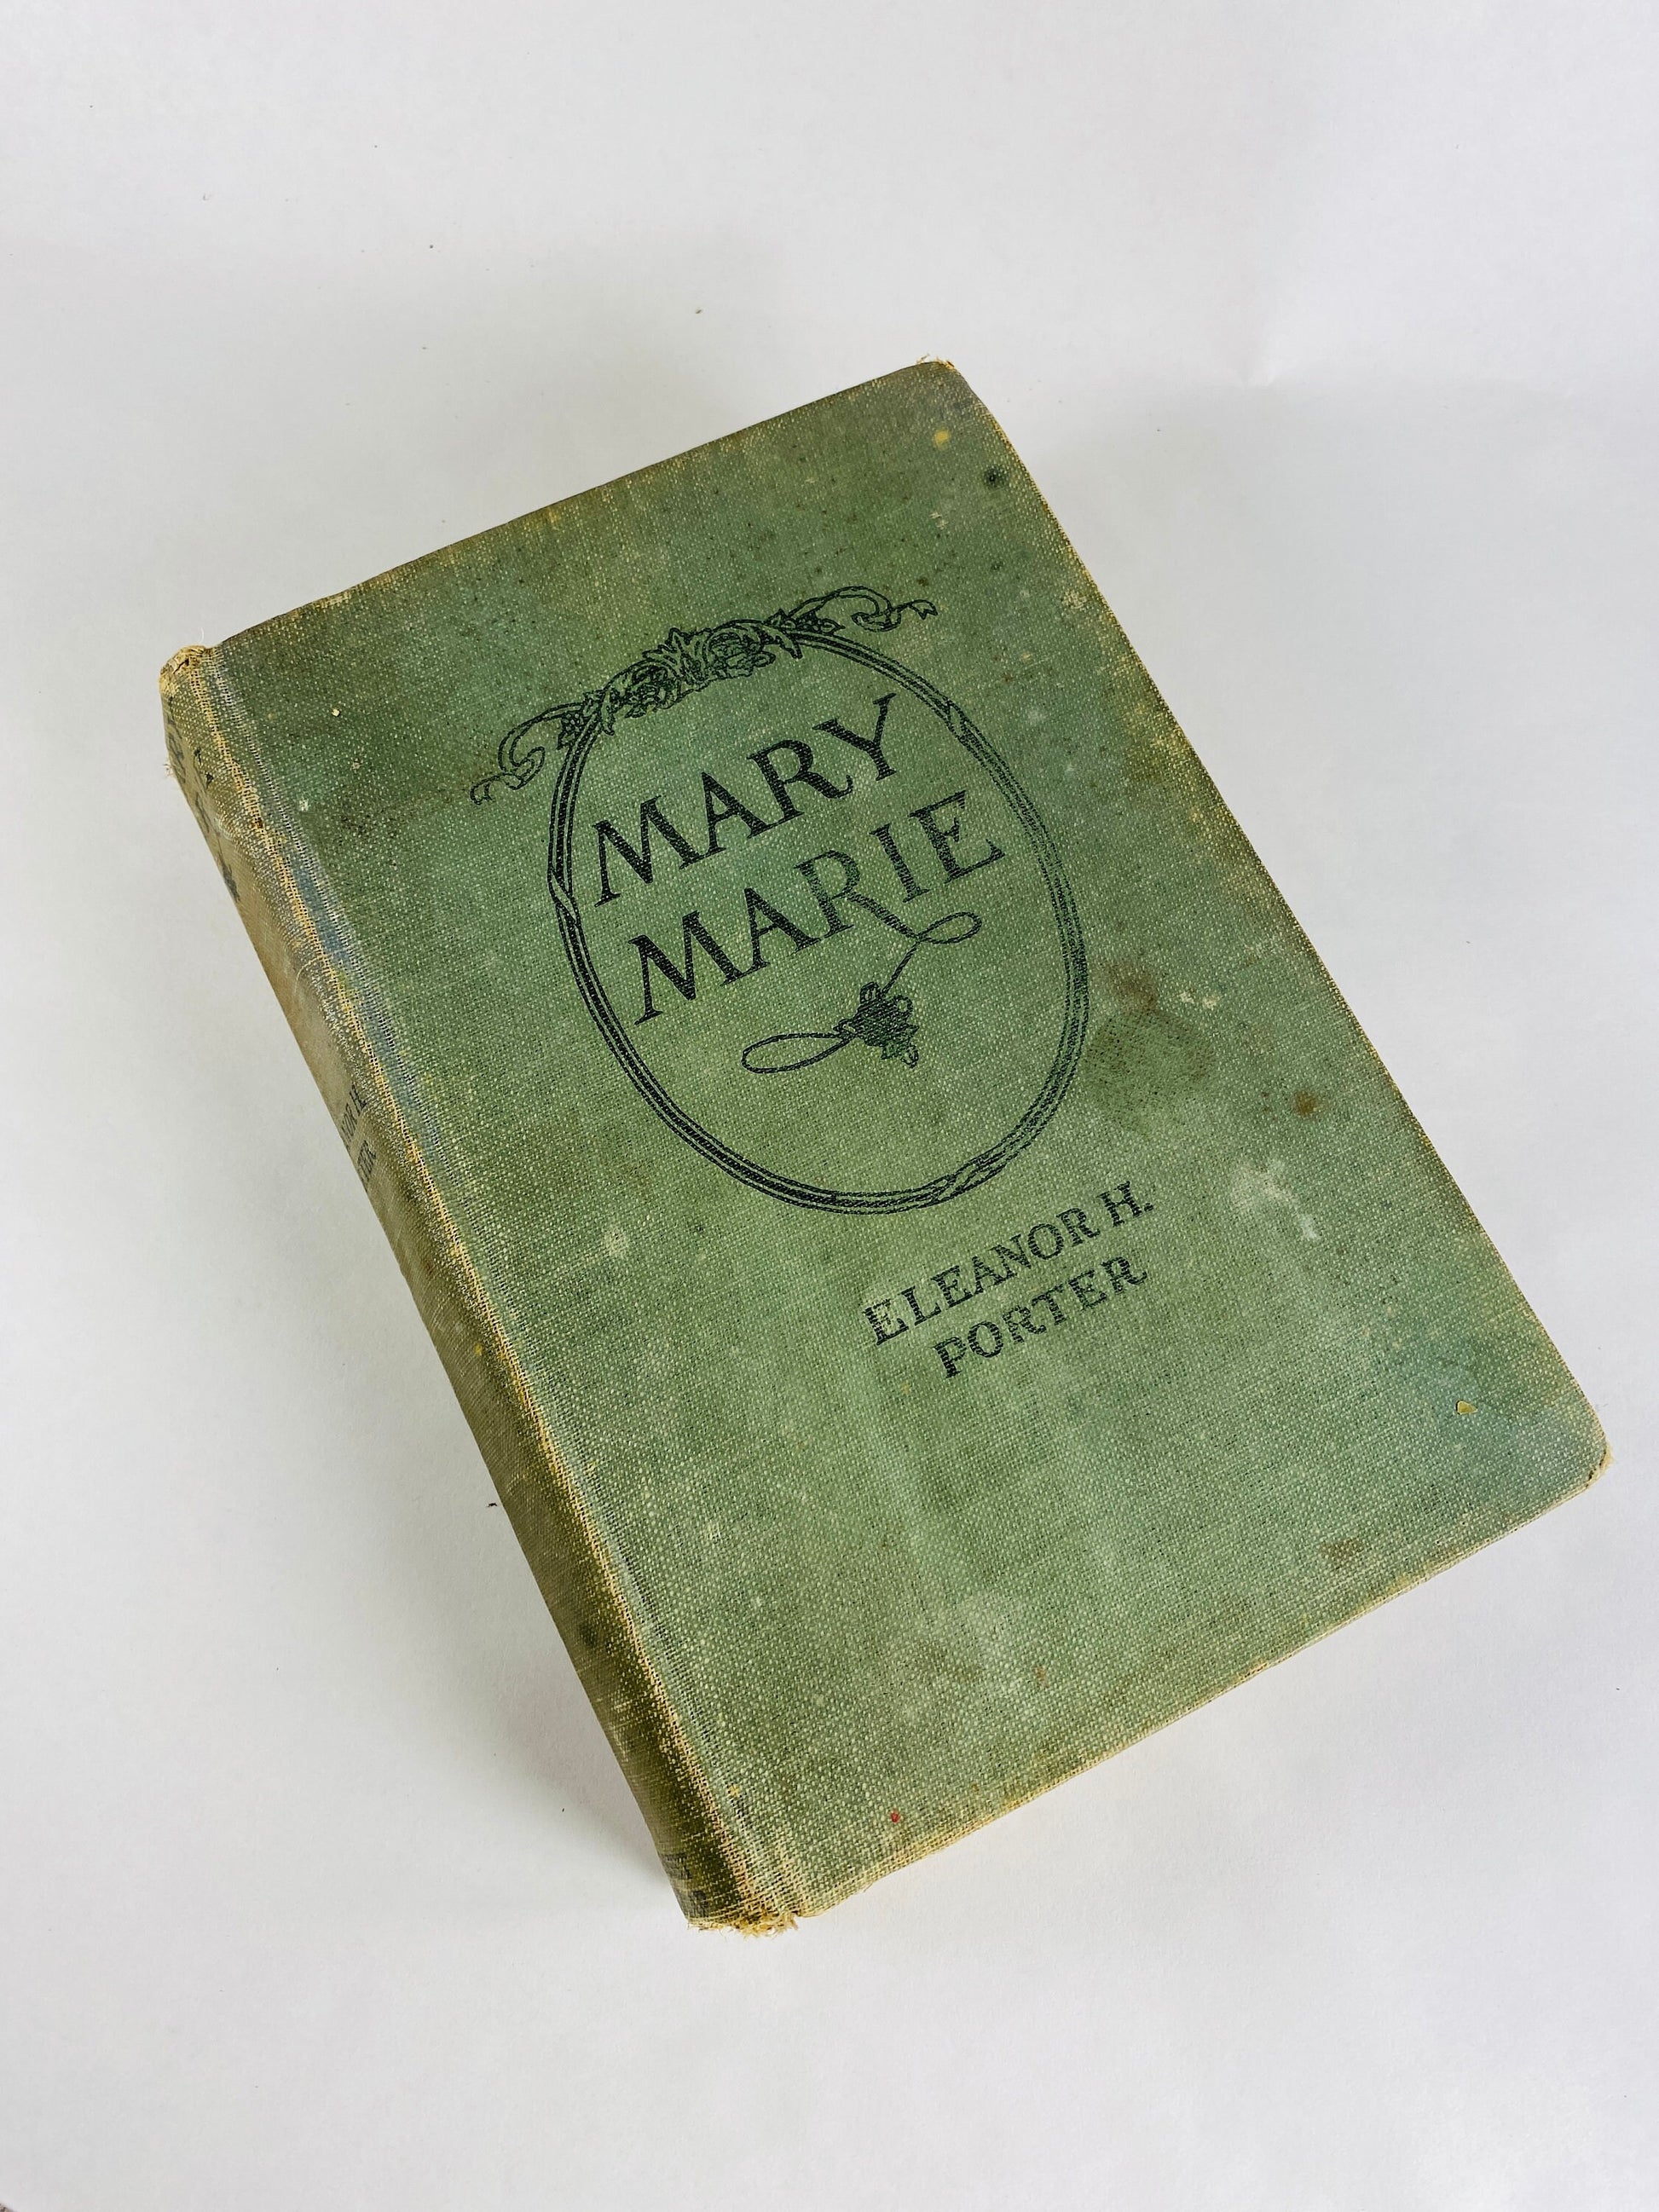 Mary Marie book by Eleanor Porter Vintage book circa 1920 Child's perspective on separation and divorce Author of Pollyanna Grosset & Dunlap